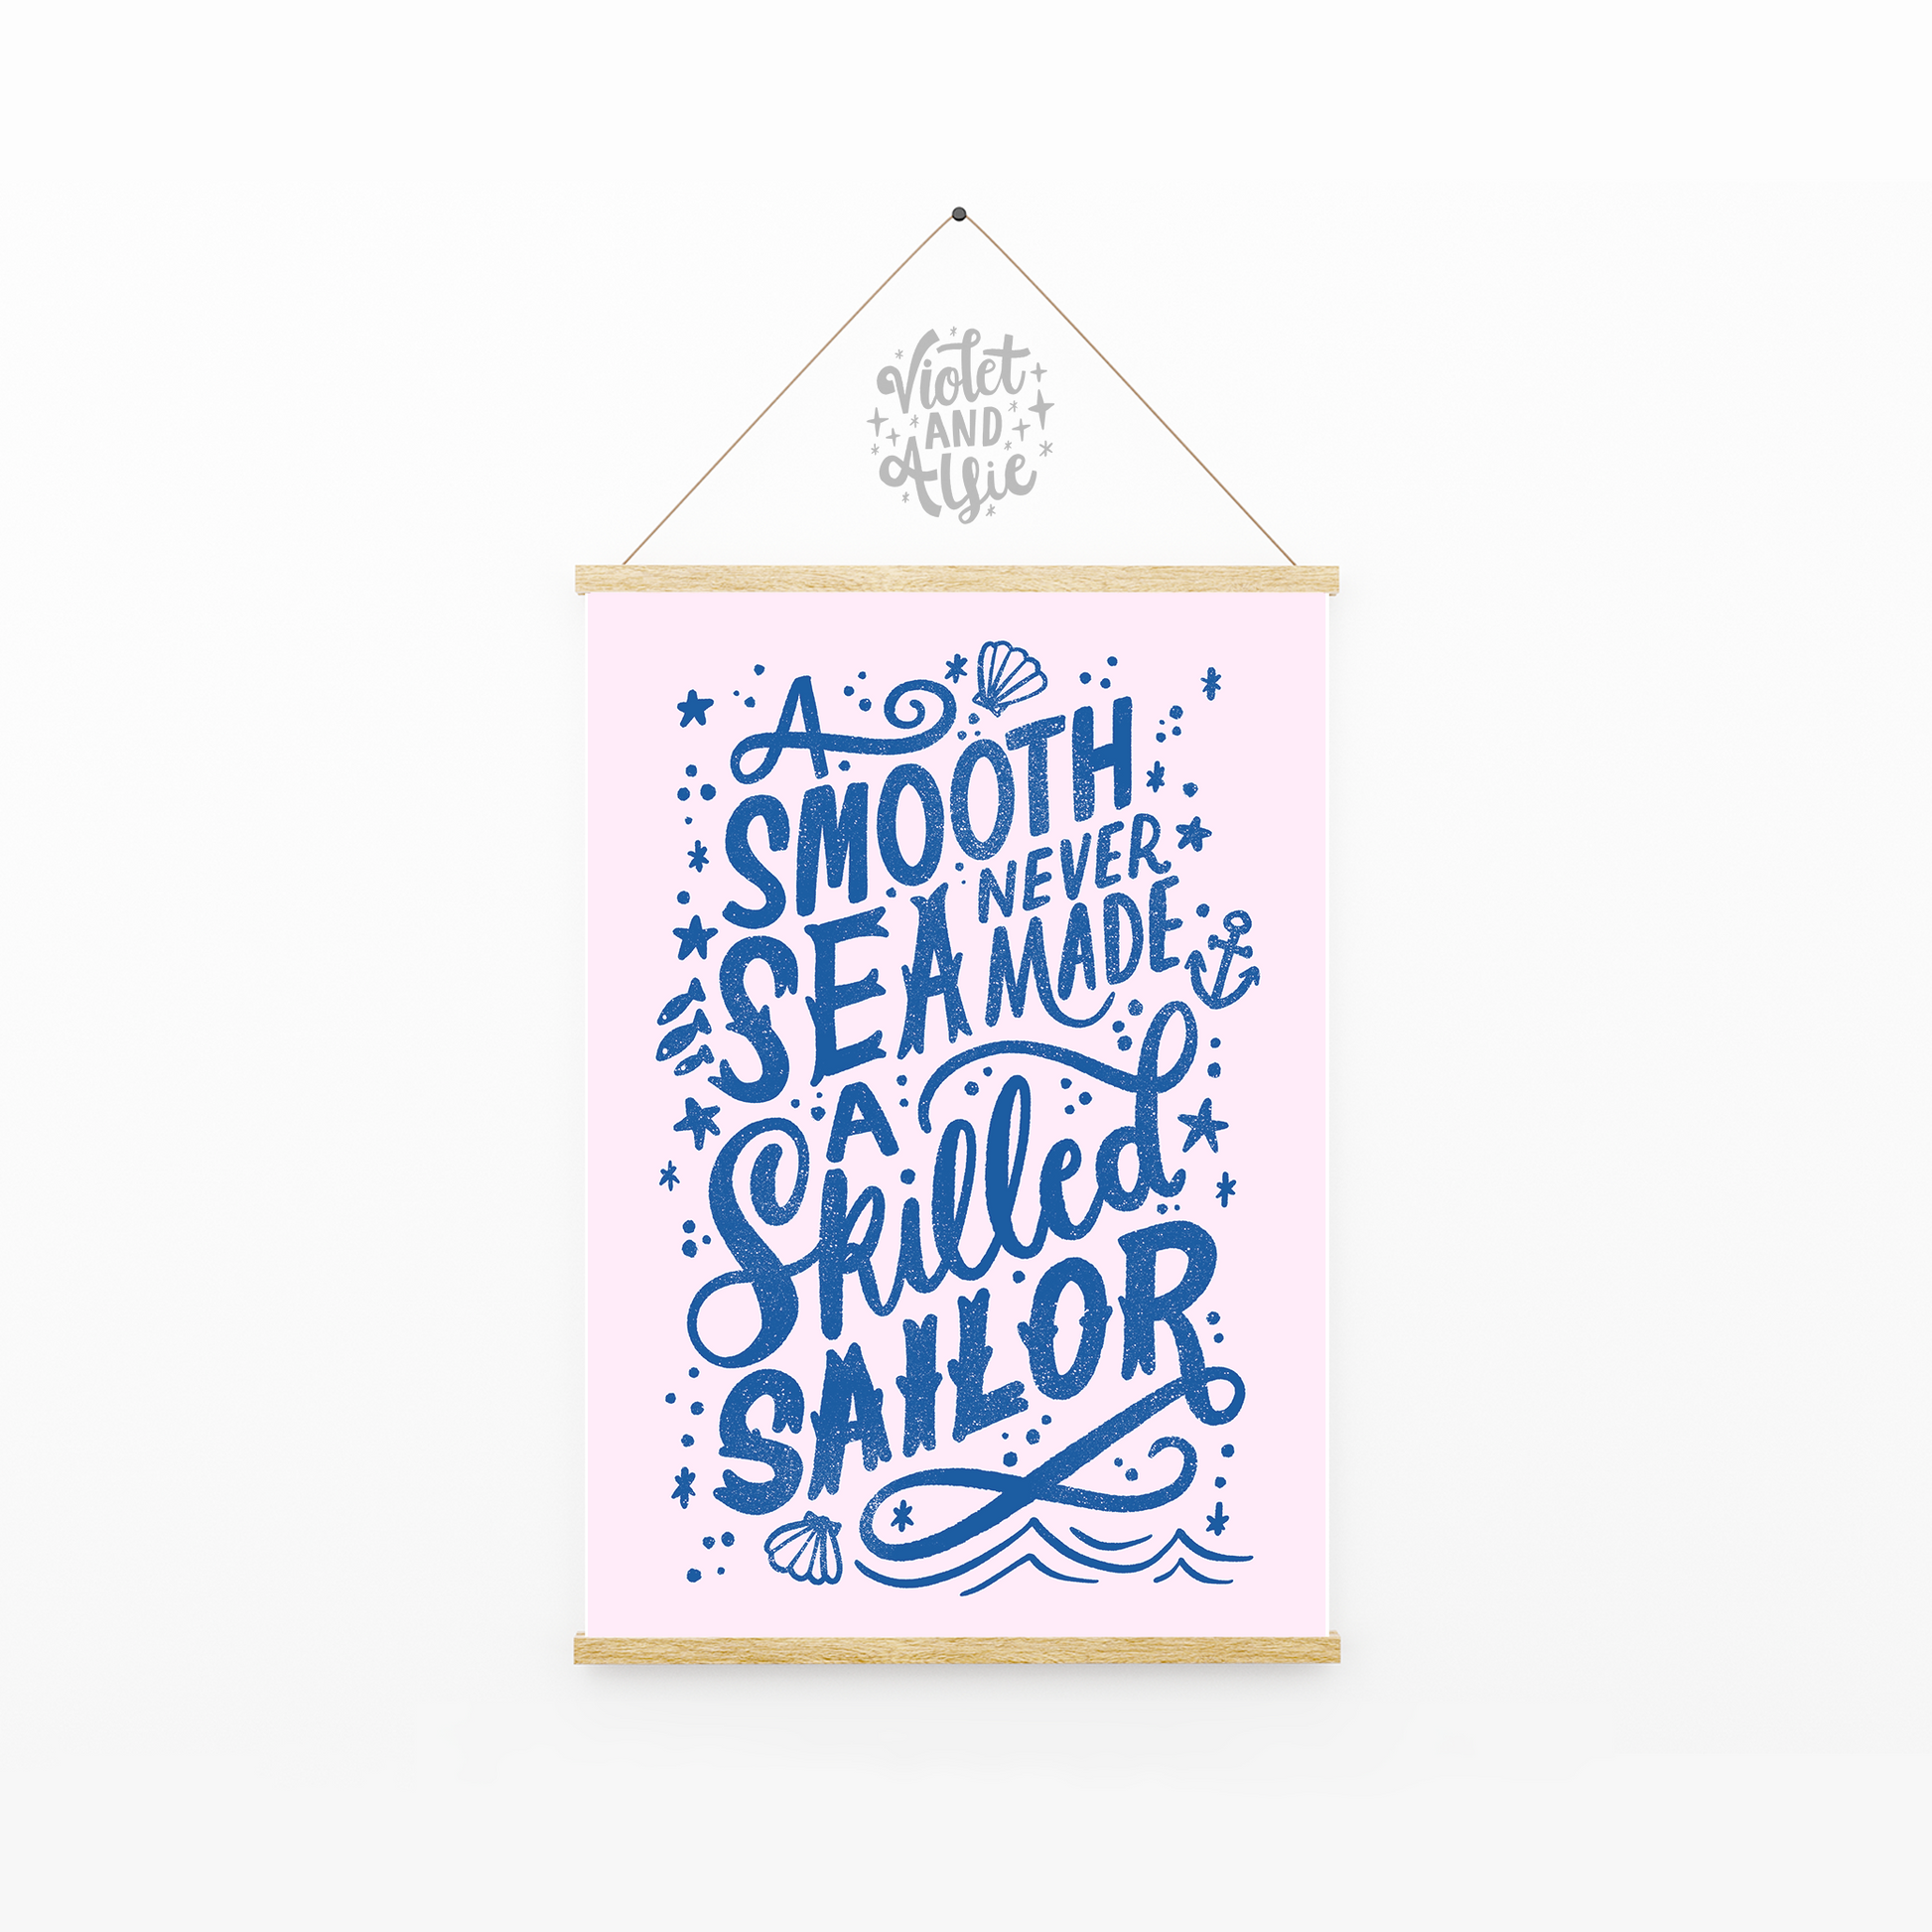 "A smooth sea never made a skilled sailor" This gorgeous pink and blue typographic print makes a thoughtful gift for anyone that might be needing a little encouragement or is going through a rough patch. empowering quote, mental health poster, send a smile, mental motivation, inspirational quote, quote prints